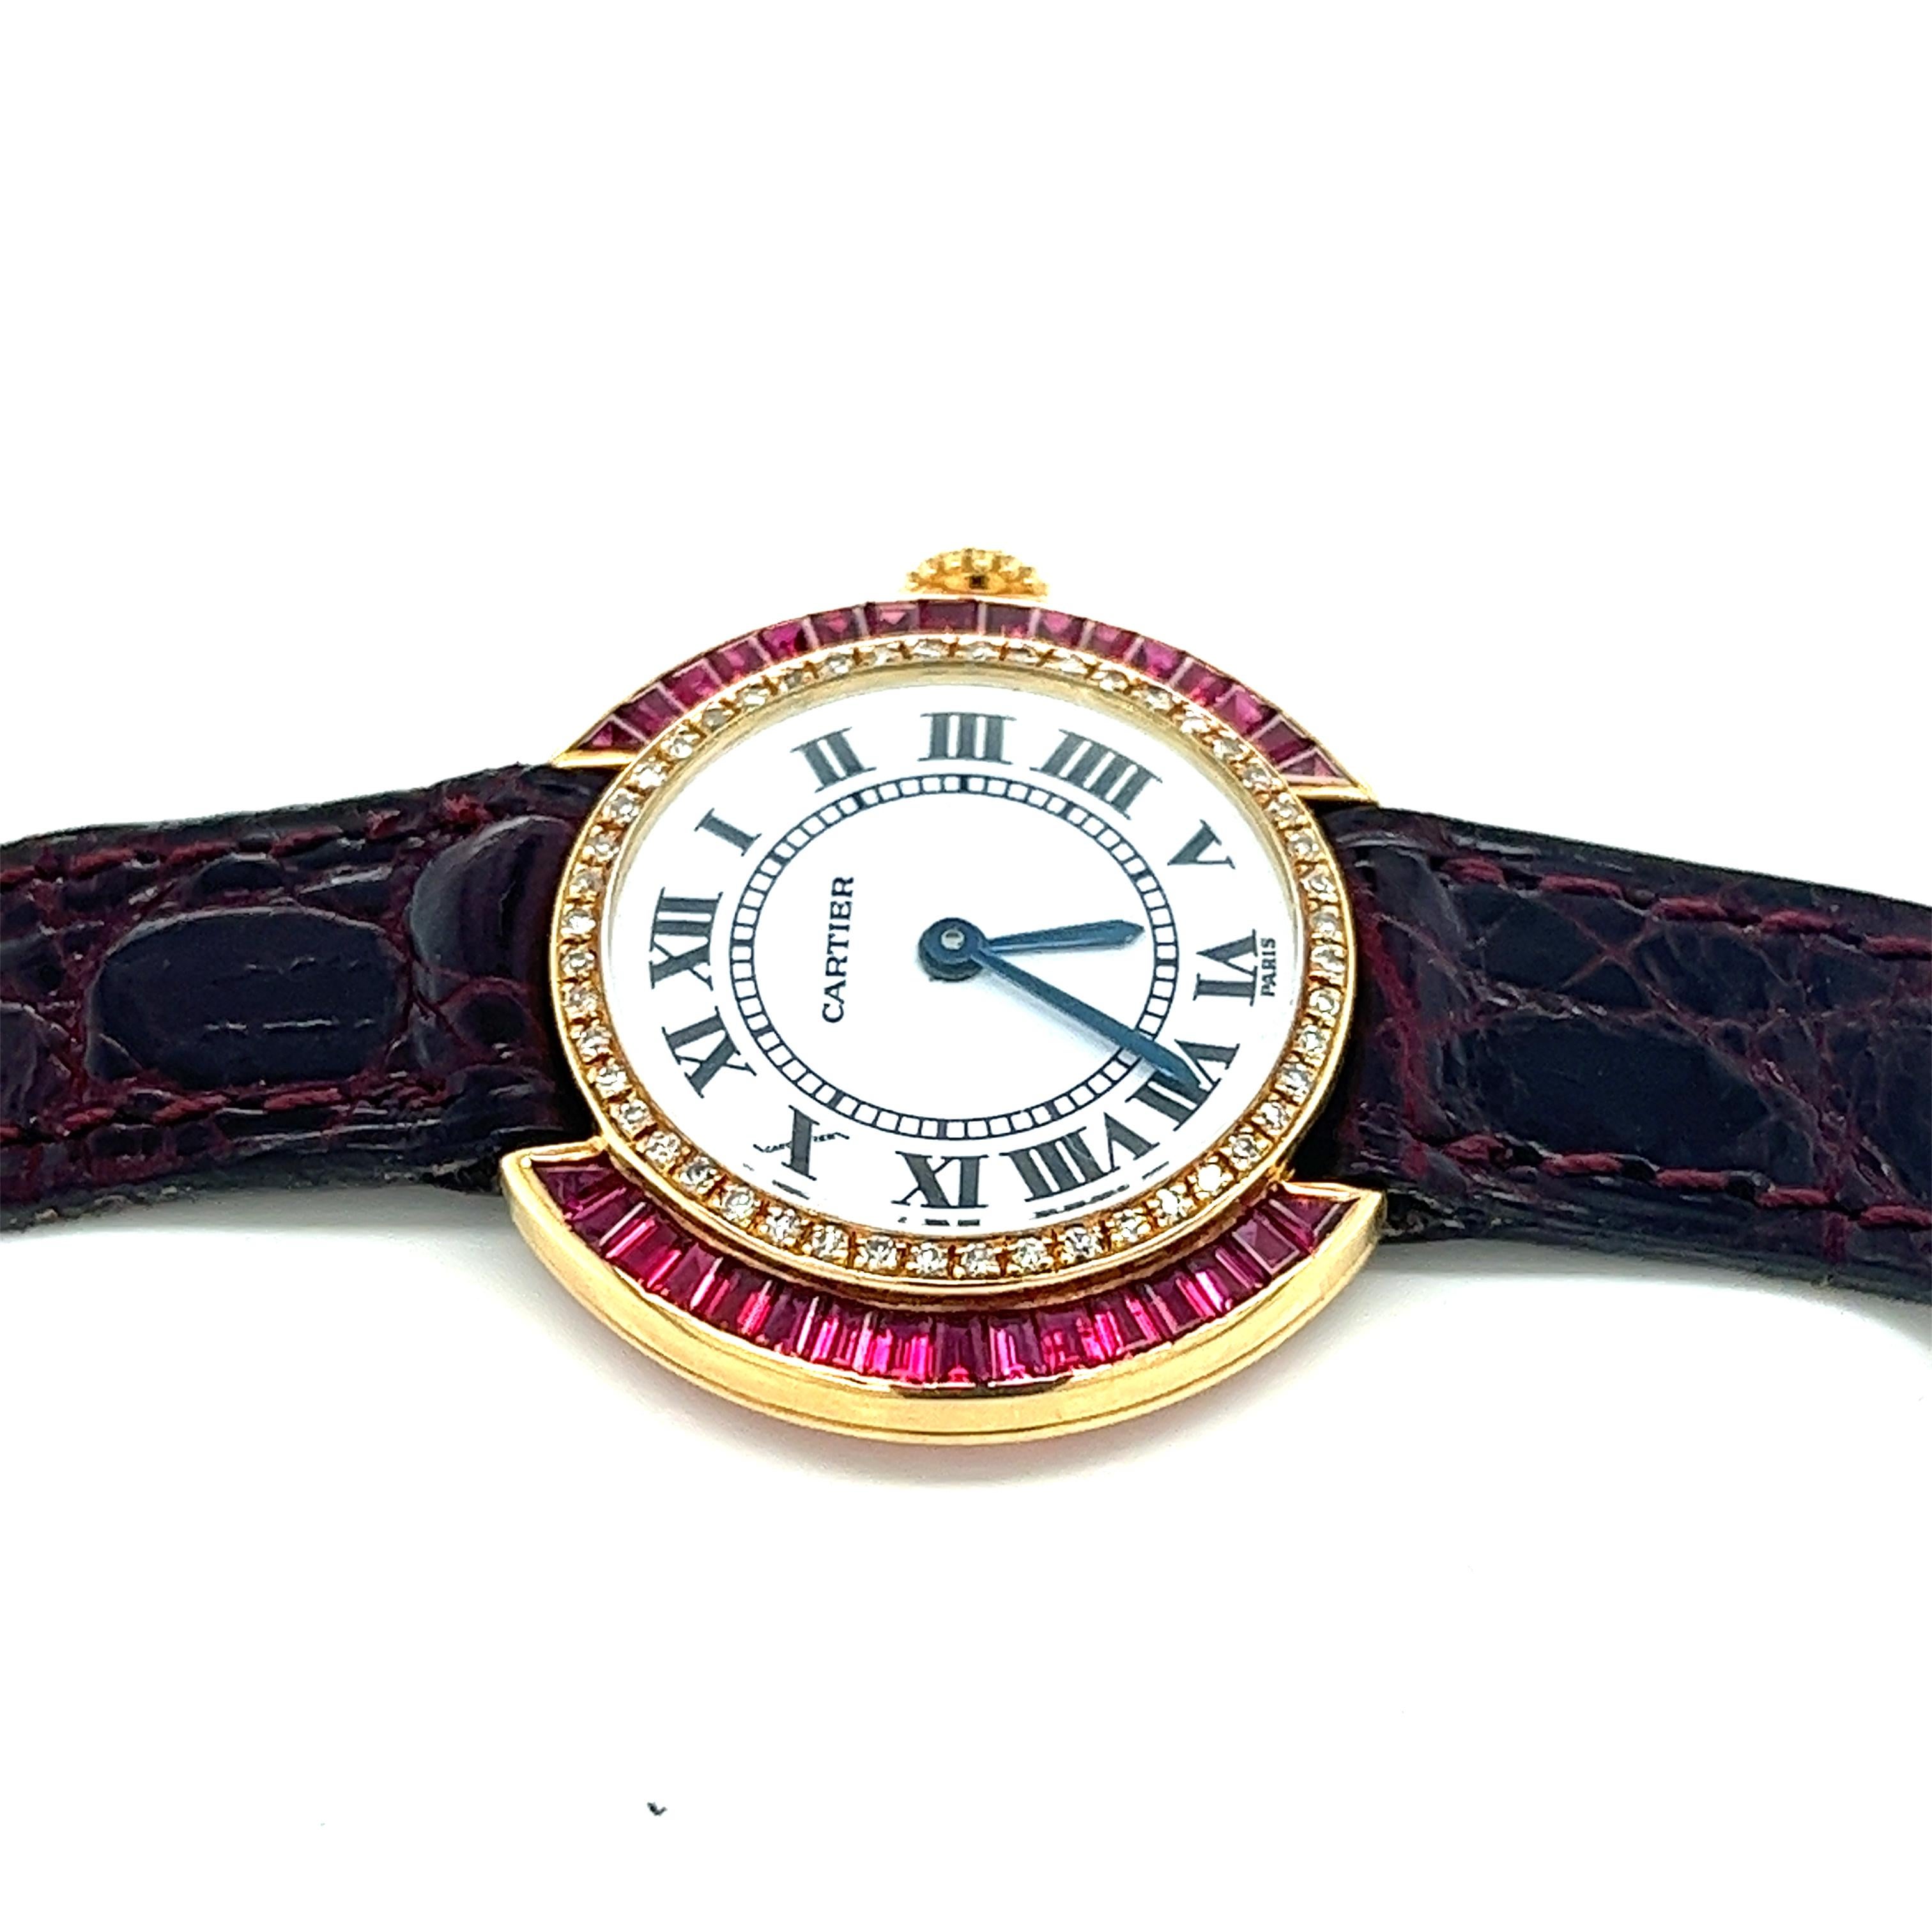 Cartier Paris 18k yellow gold and red leather ladies wristwatch with baguette cut ruby and round cut diamond bezel. 28mm width round case with faceted crystal push/pull crown. 18K deployment clasp that fits 6.5 inch wrist (message for resizing).